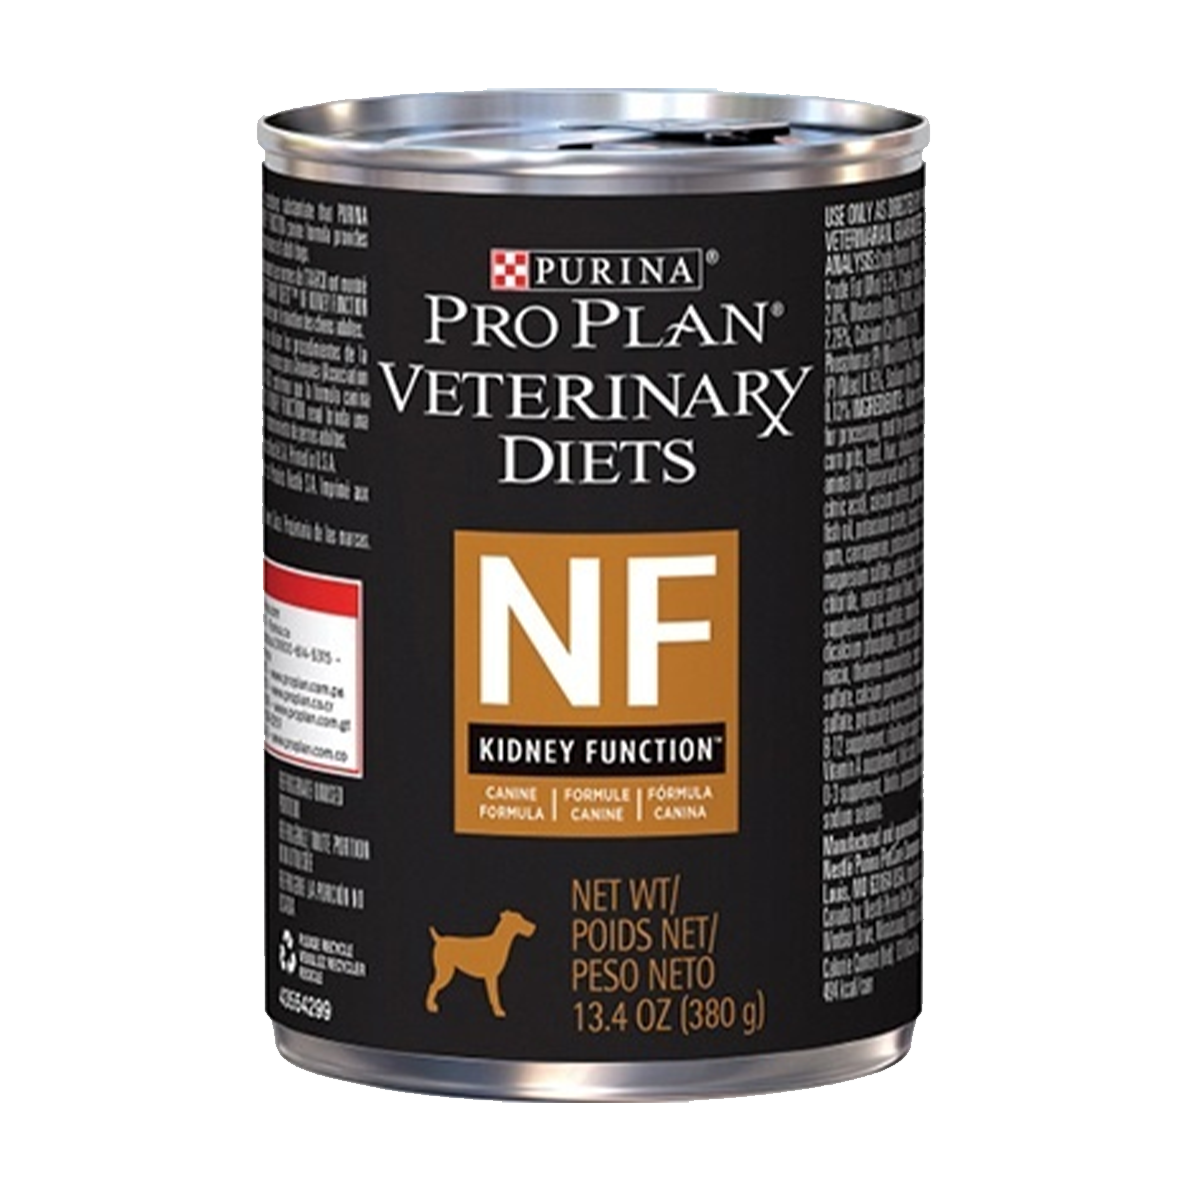 purina-pro-plan-kidney-function-canine-0_0.png